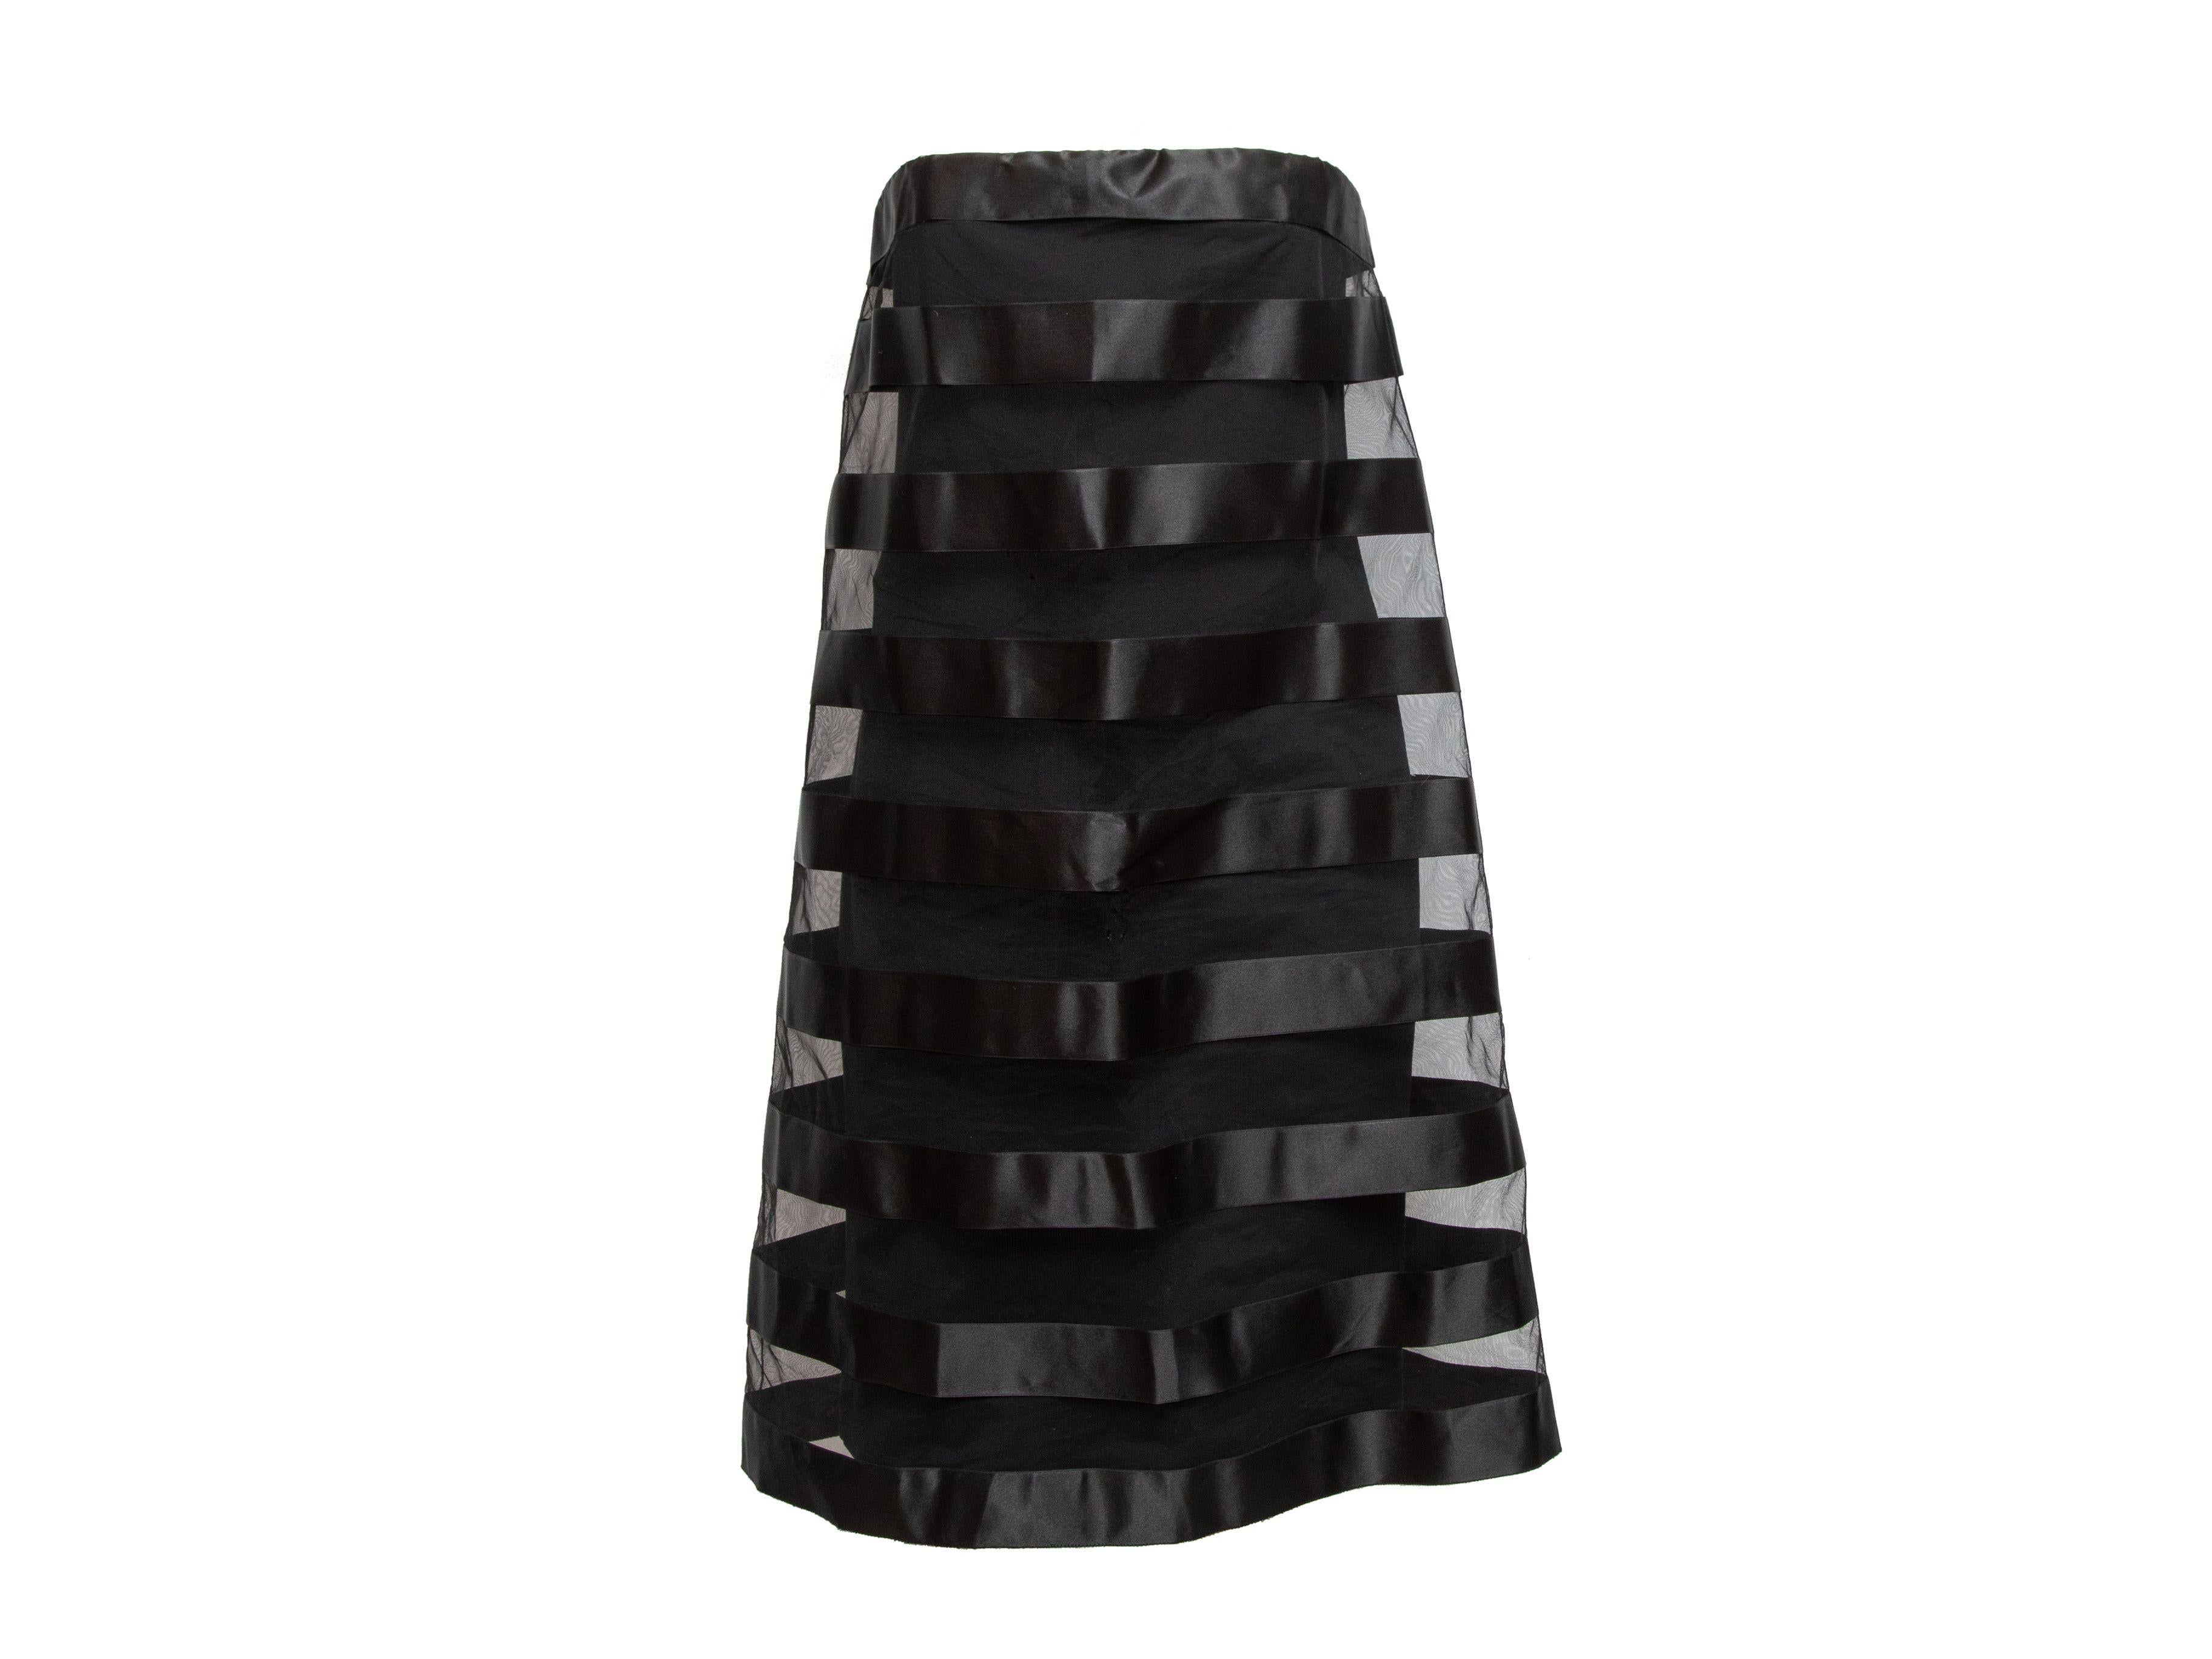 Chanel Black Boutique Mesh Overlay Strapless Ribbon Dress In Good Condition For Sale In New York, NY